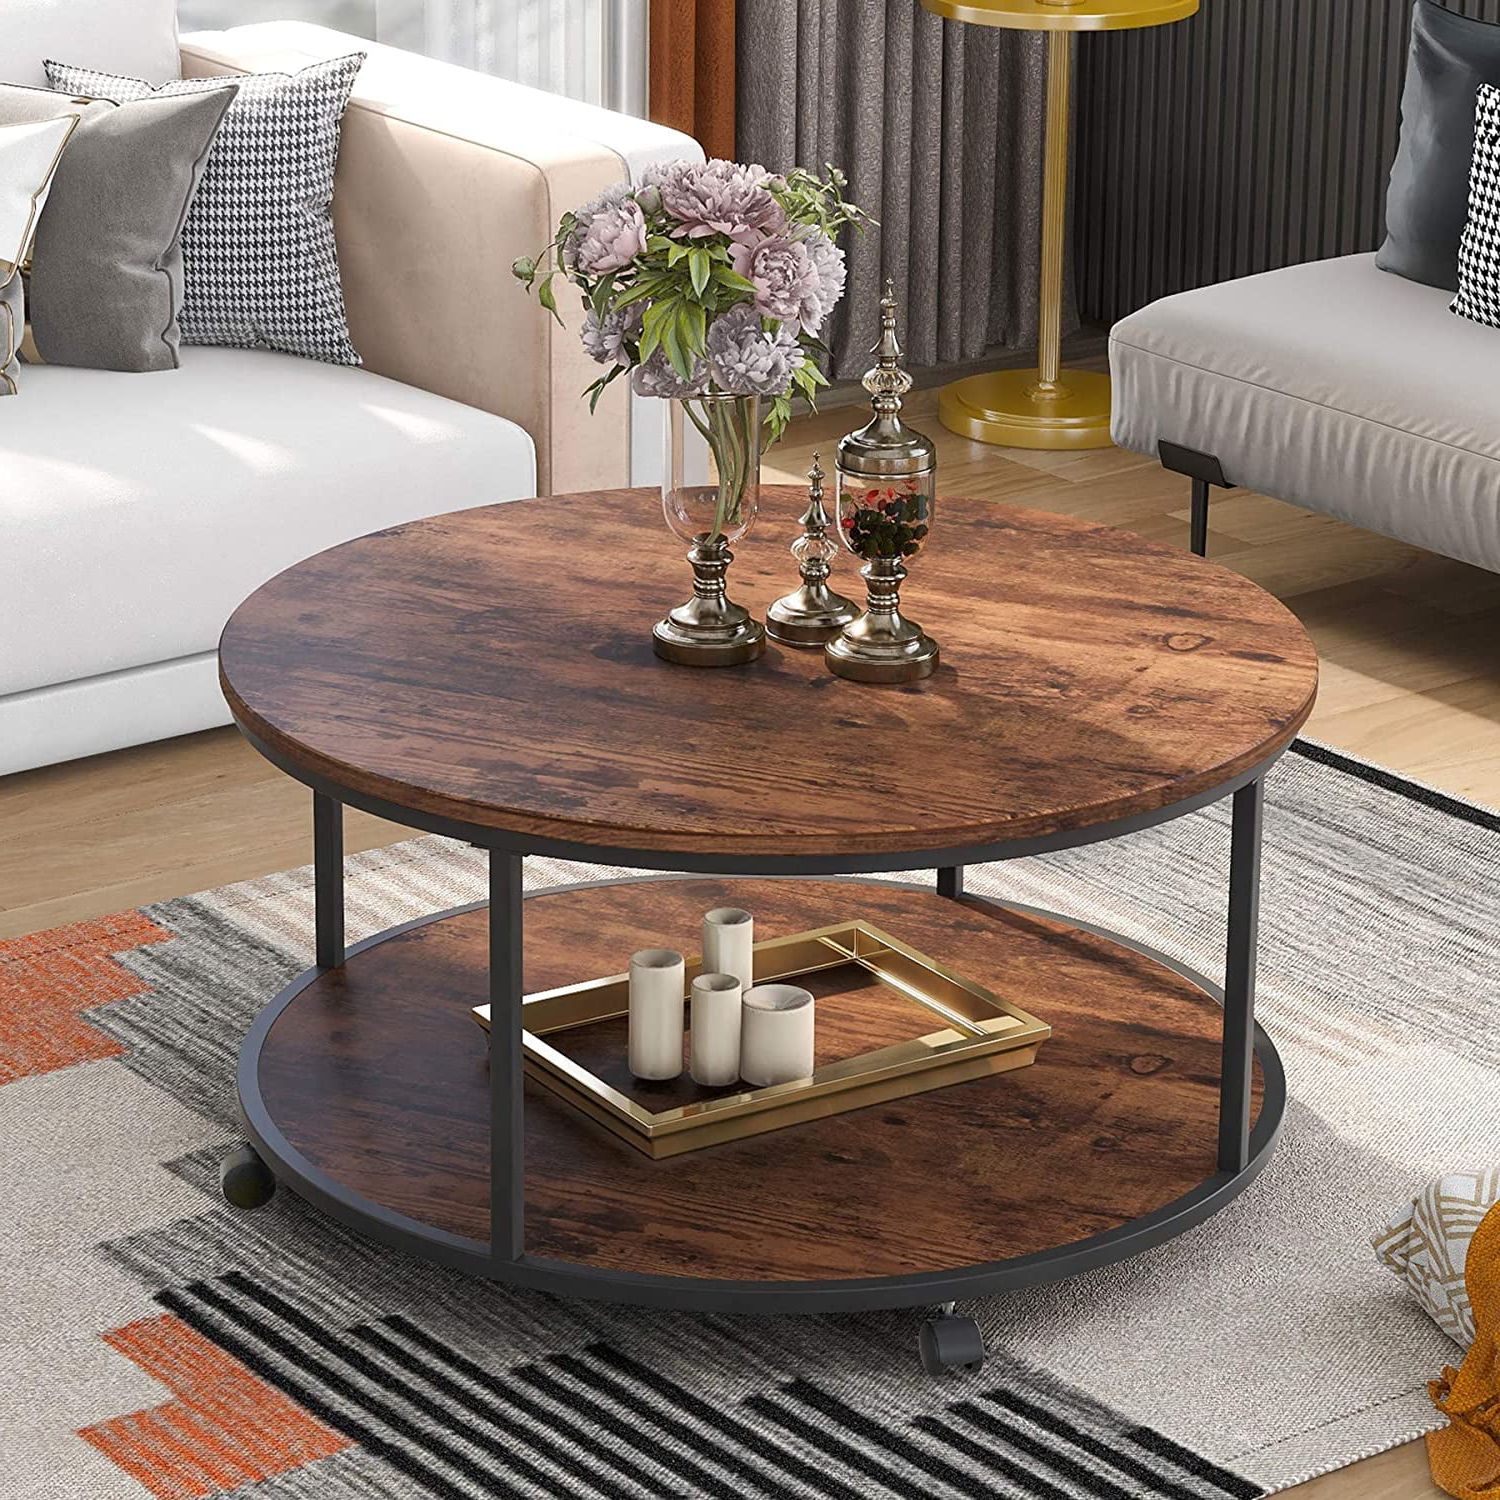 Wooden Coffee Table Designs For Living Room – Round Coffee Table Regarding Brown Rustic Coffee Tables (Gallery 10 of 20)